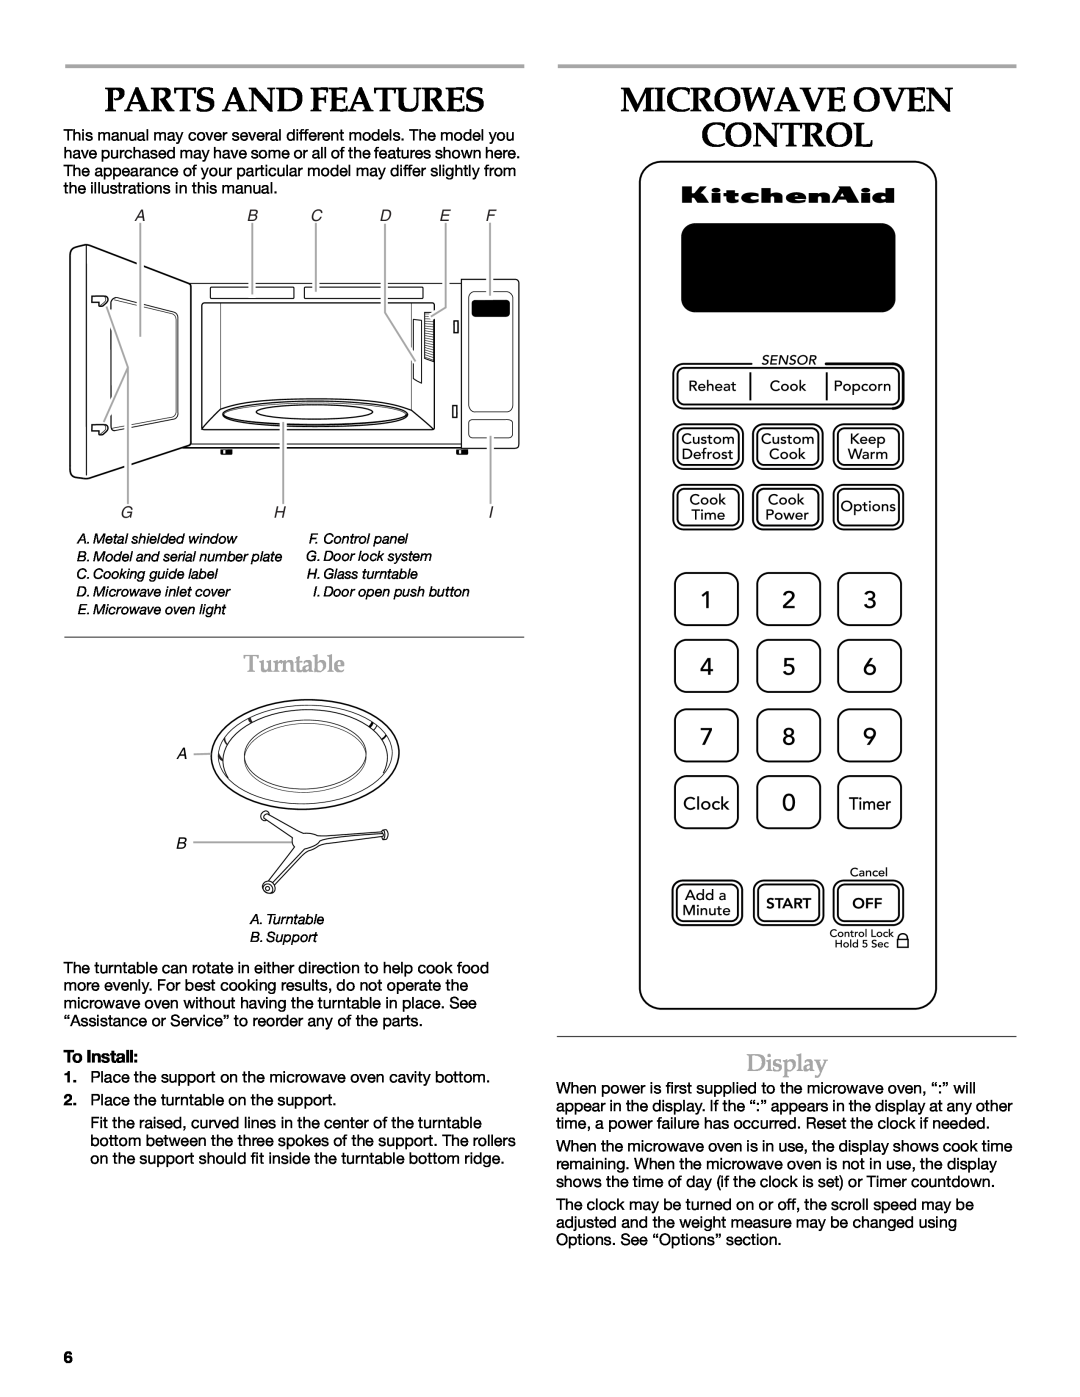 KitchenAid KCMS2055SSS manual Parts And Features, Microwave Oven Control, Turntable, Display, Ab C D E F 